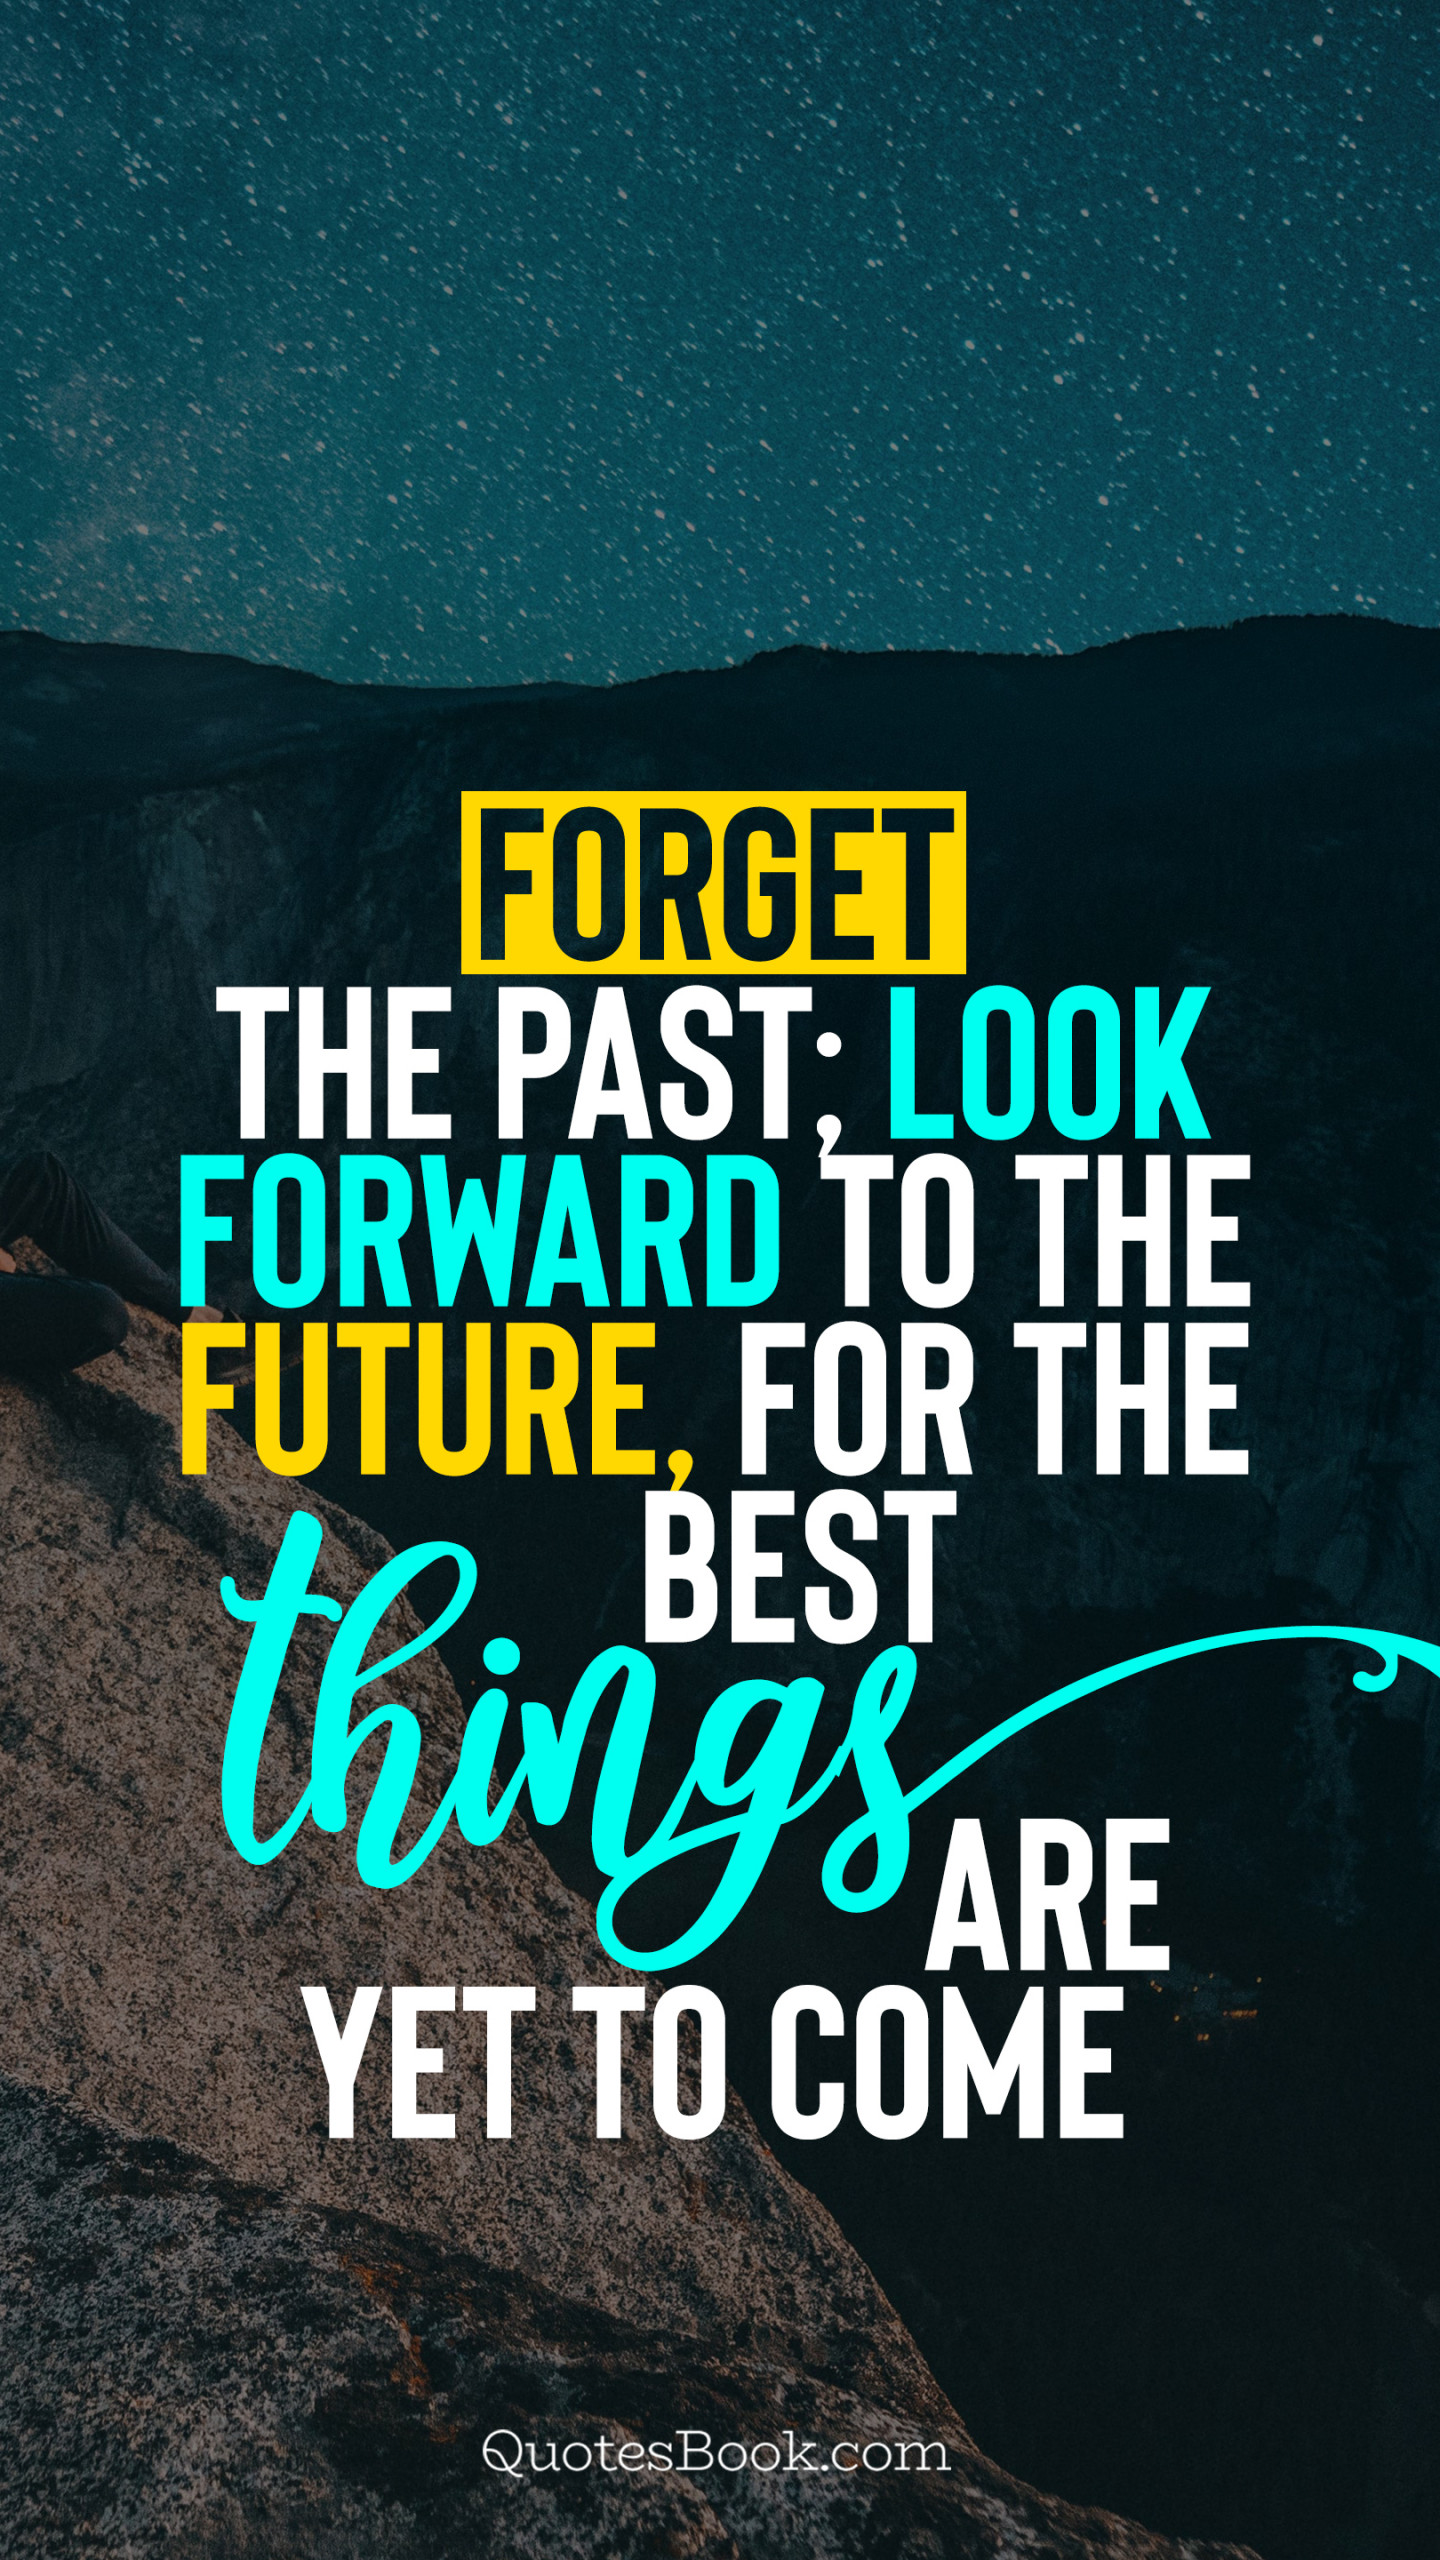 Forget the past; look forward to the future, for the best things are